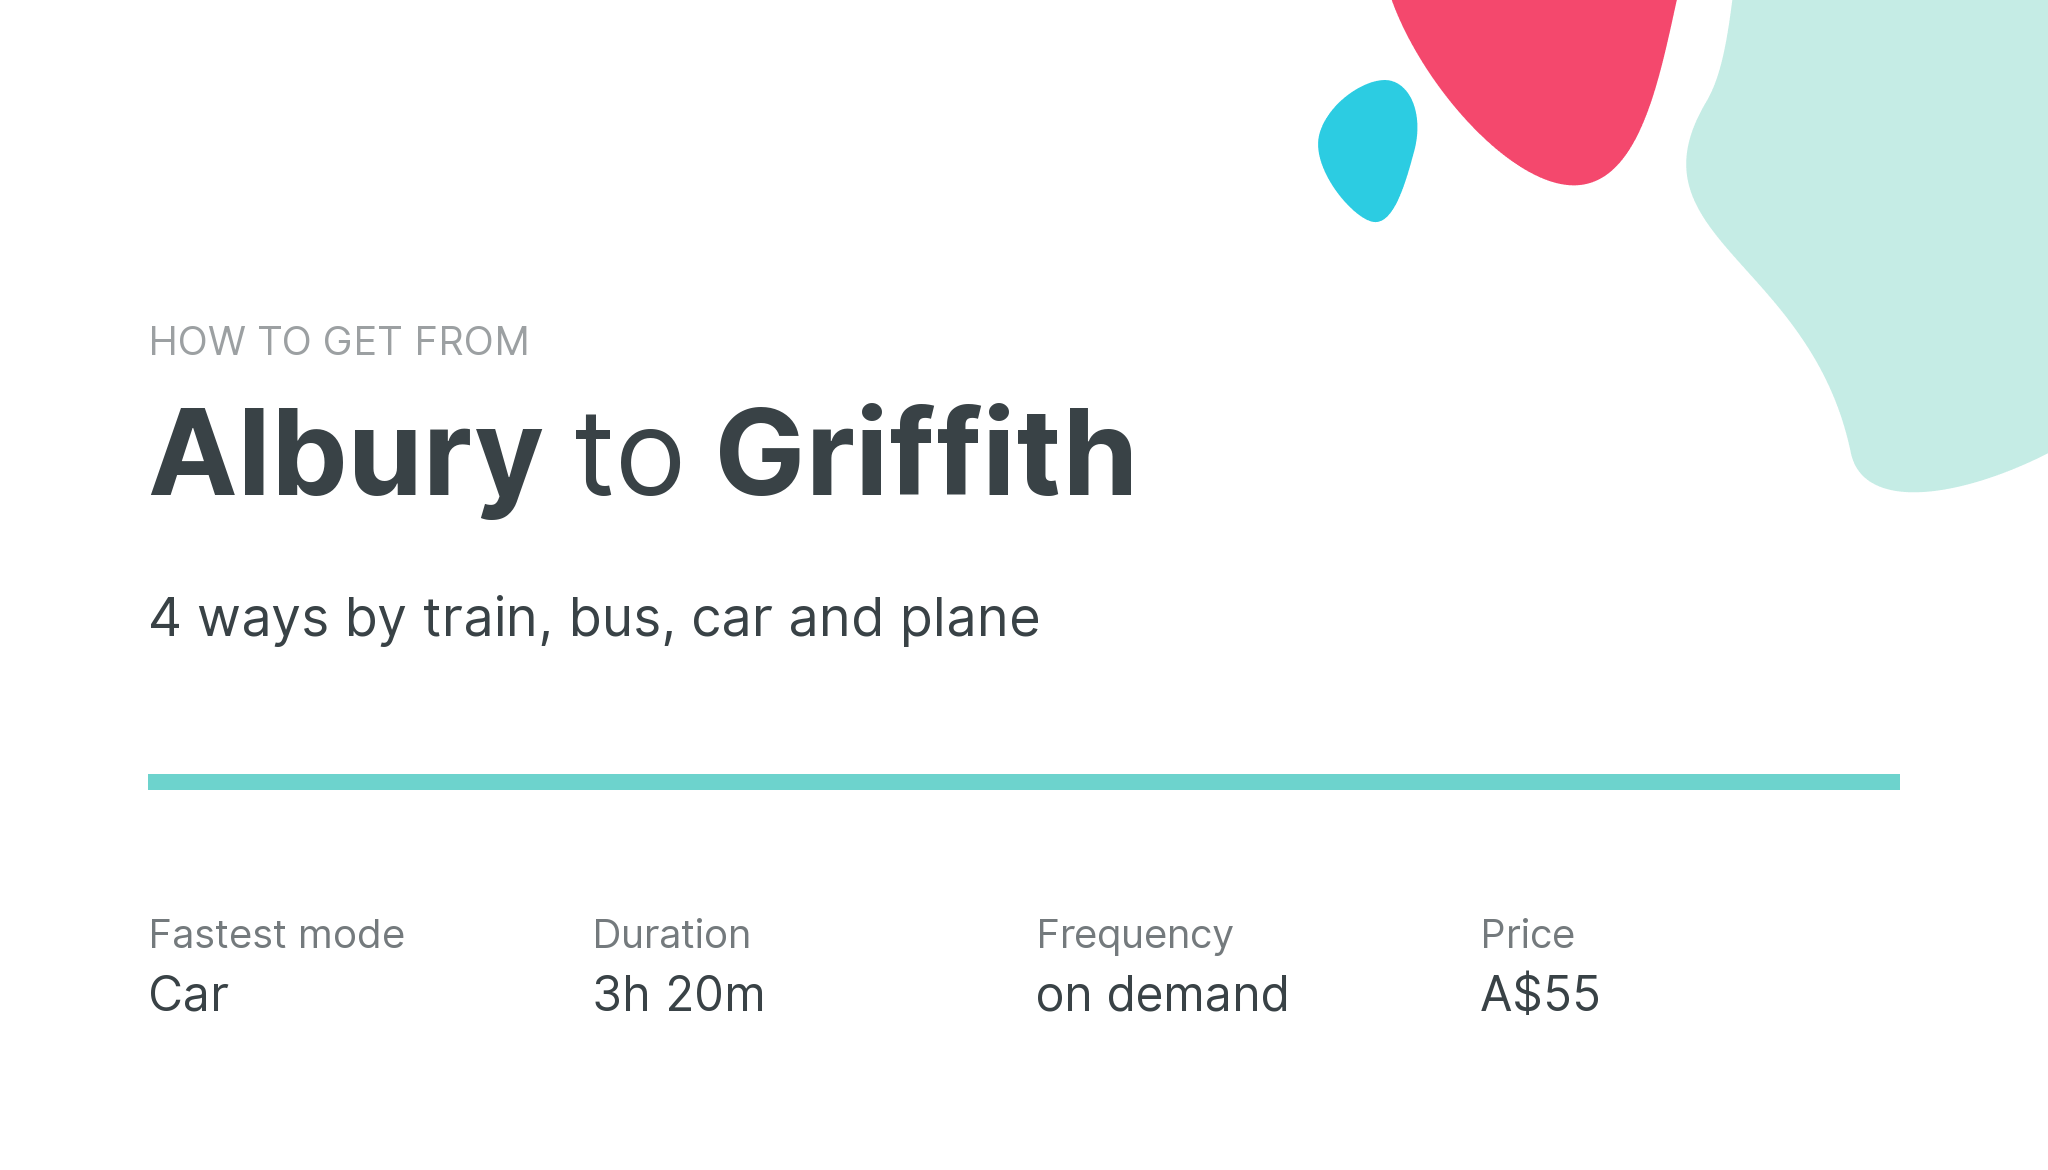 How do I get from Albury to Griffith